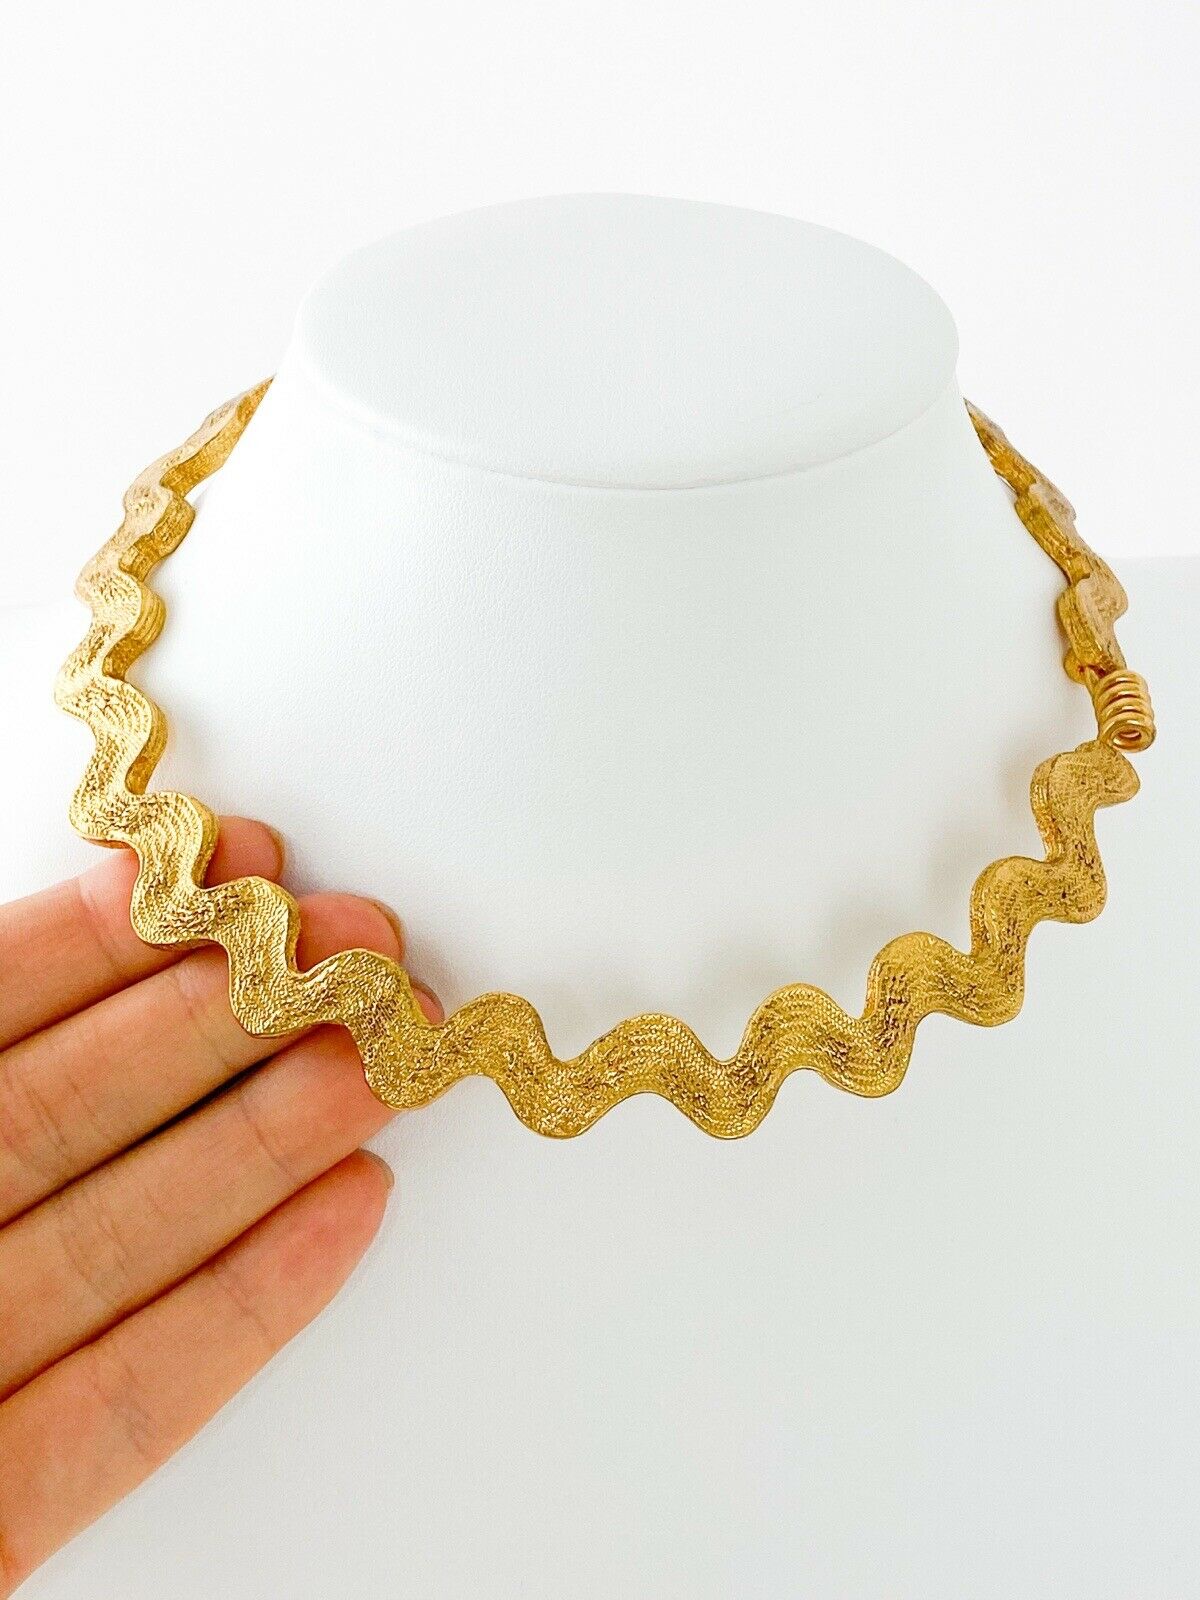 YSL Yves Saint Laurent Vintage Zigzag Textured Choker Necklace Made in France